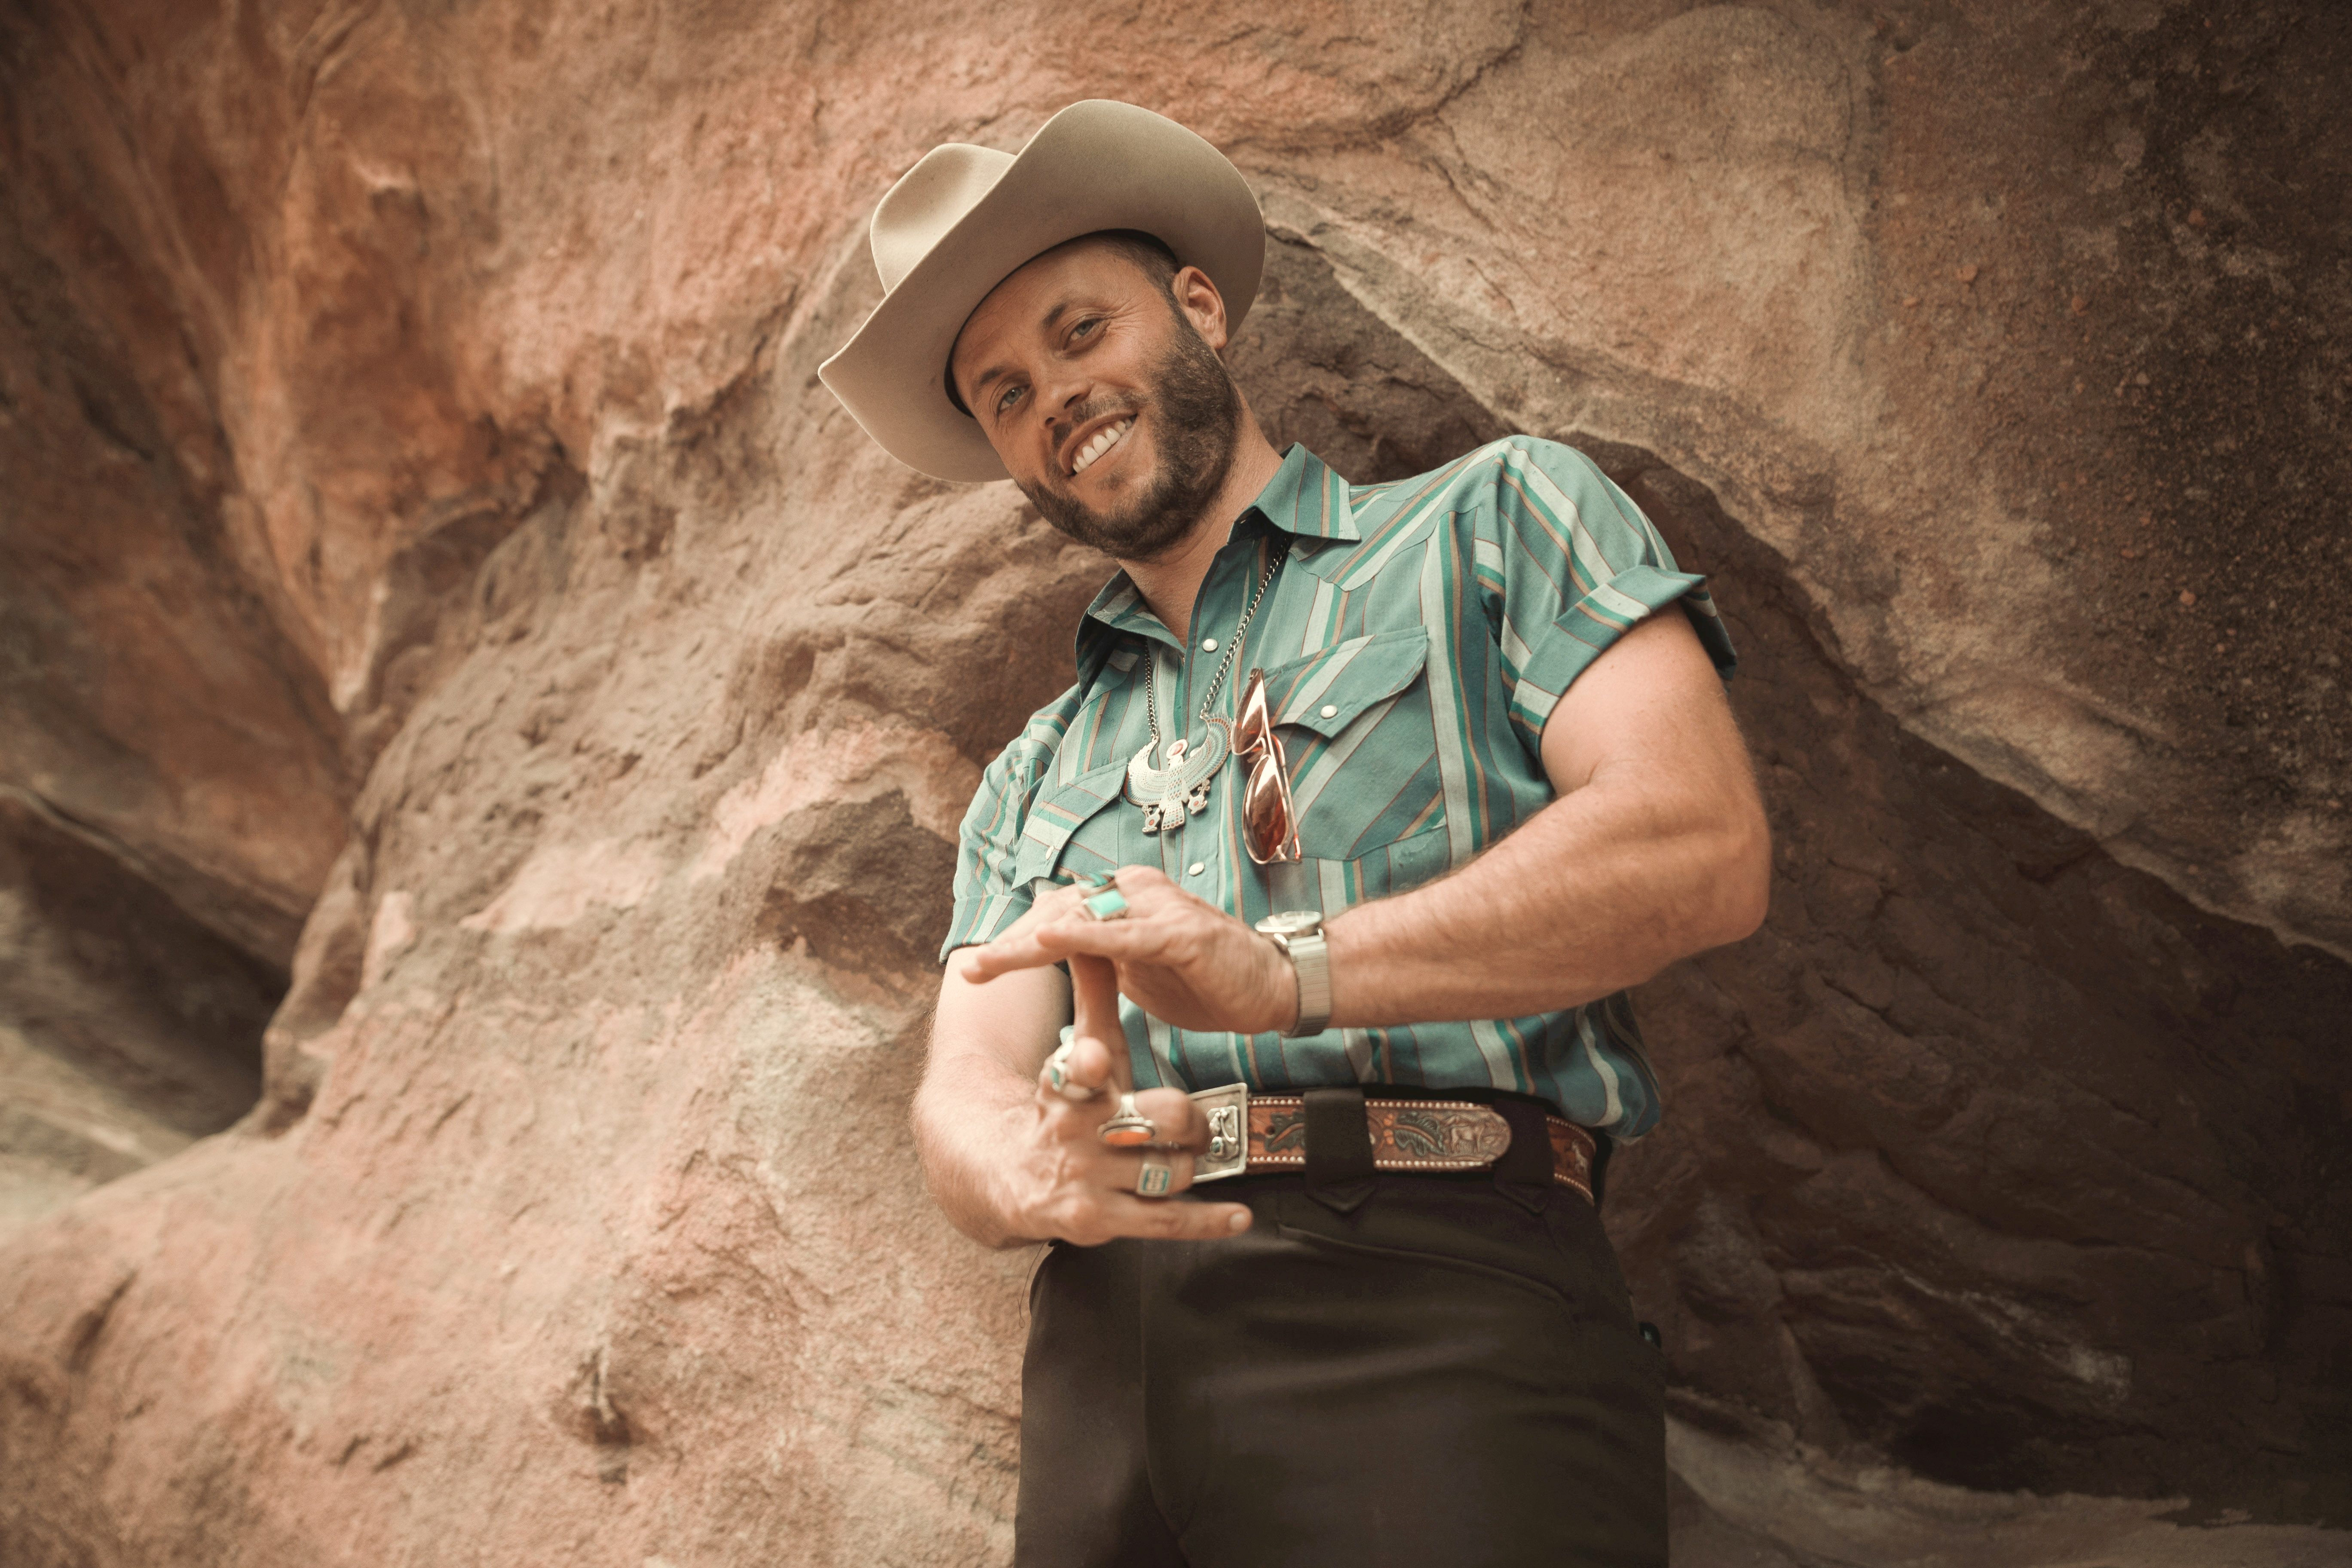 A man in a teal and white shirt and a cowboy hat poses for the camera in front of natural rock formation